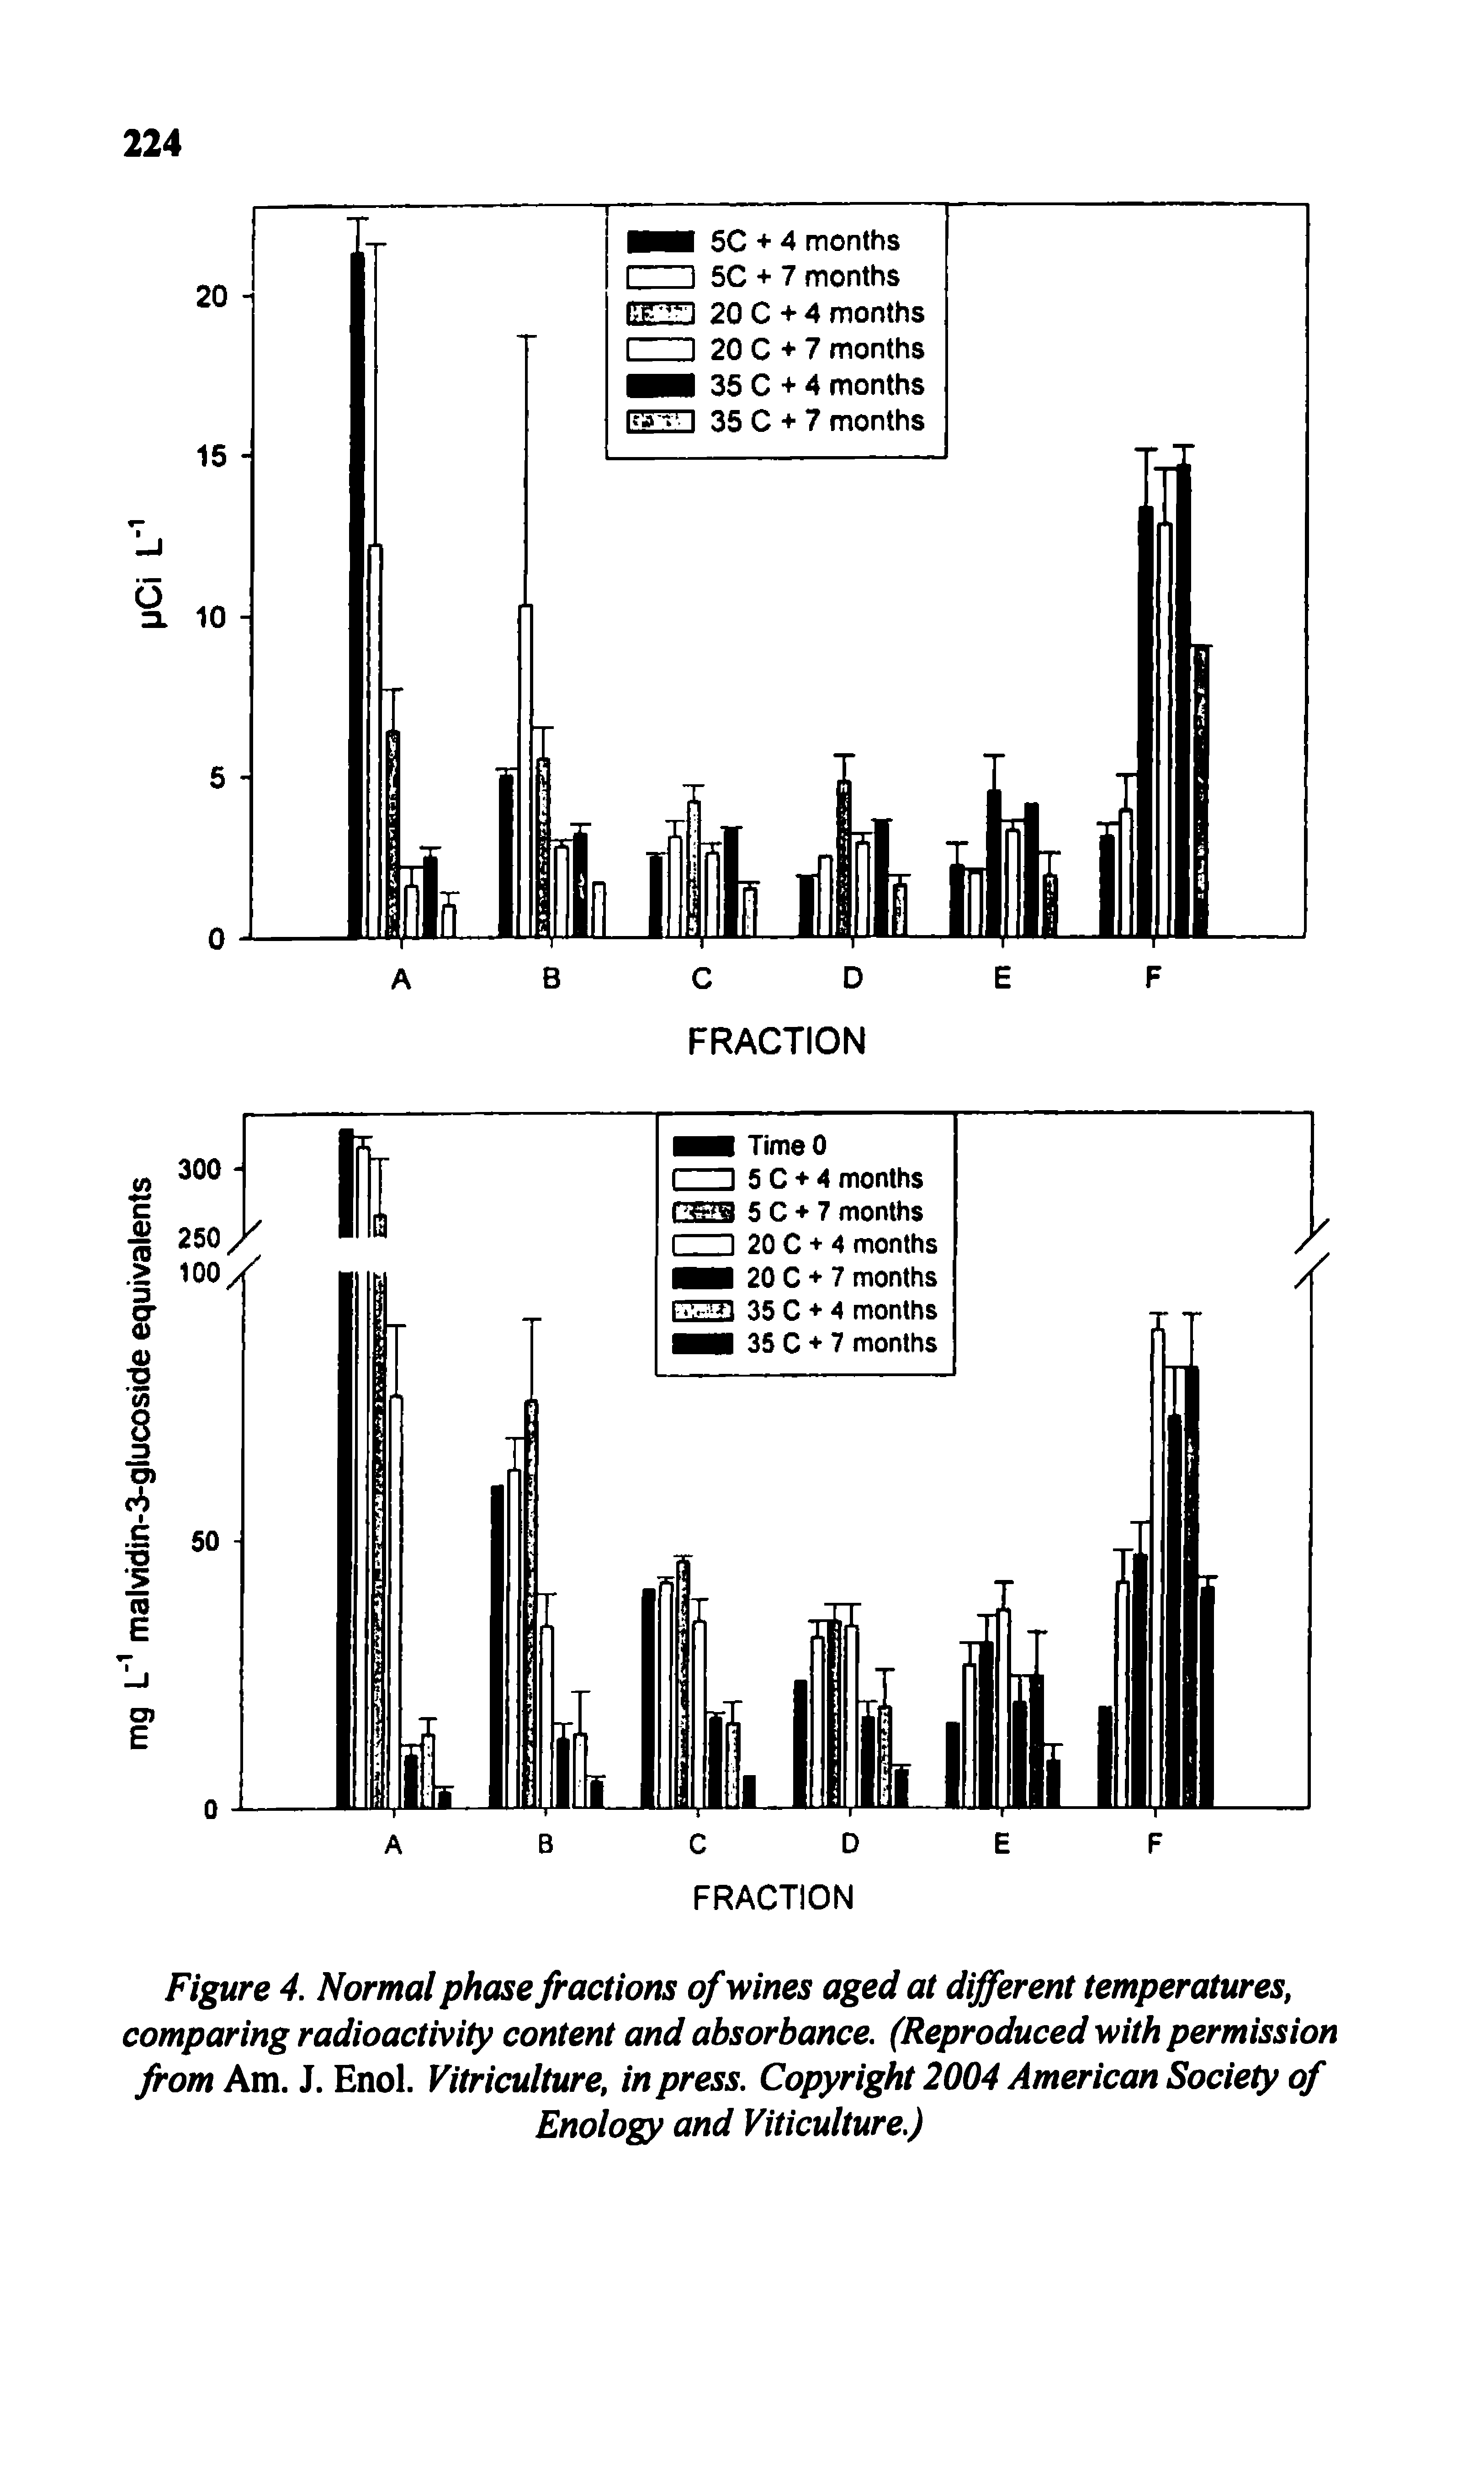 Figure 4. Normal phase fractions of wines aged at different temperatures, comparing radioactivity content and absorbance. (Reproduced with permission from Am. J. Enol. Vitriculture, in press. Copyright 2004 American Society of Enology and Viticulture.)...